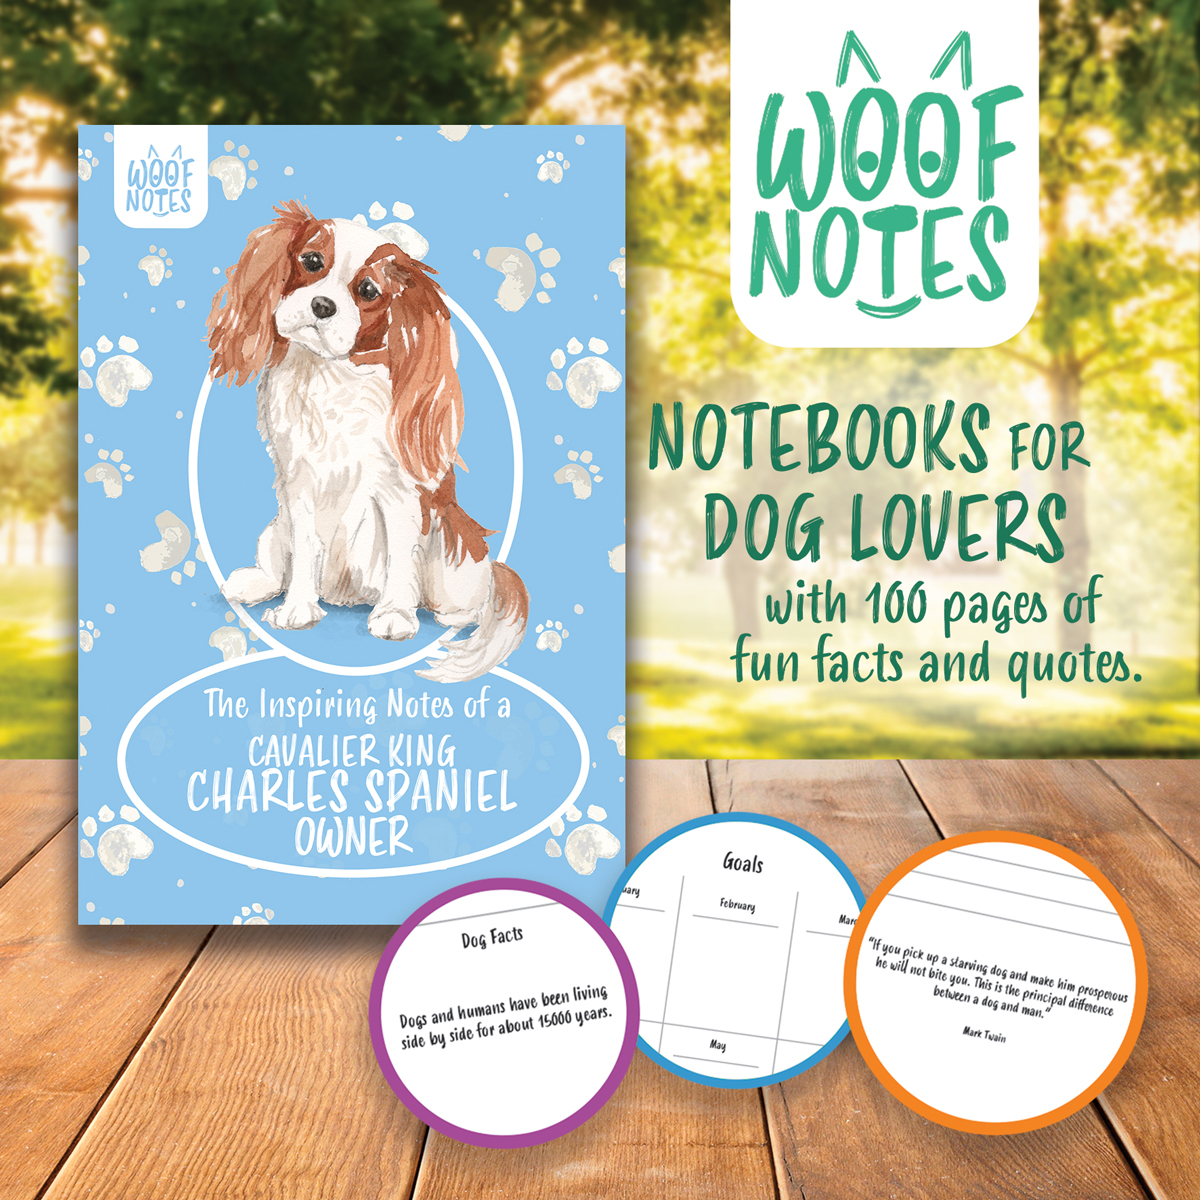 woofnotes notesbook images 03 cavalier king charles spaniel